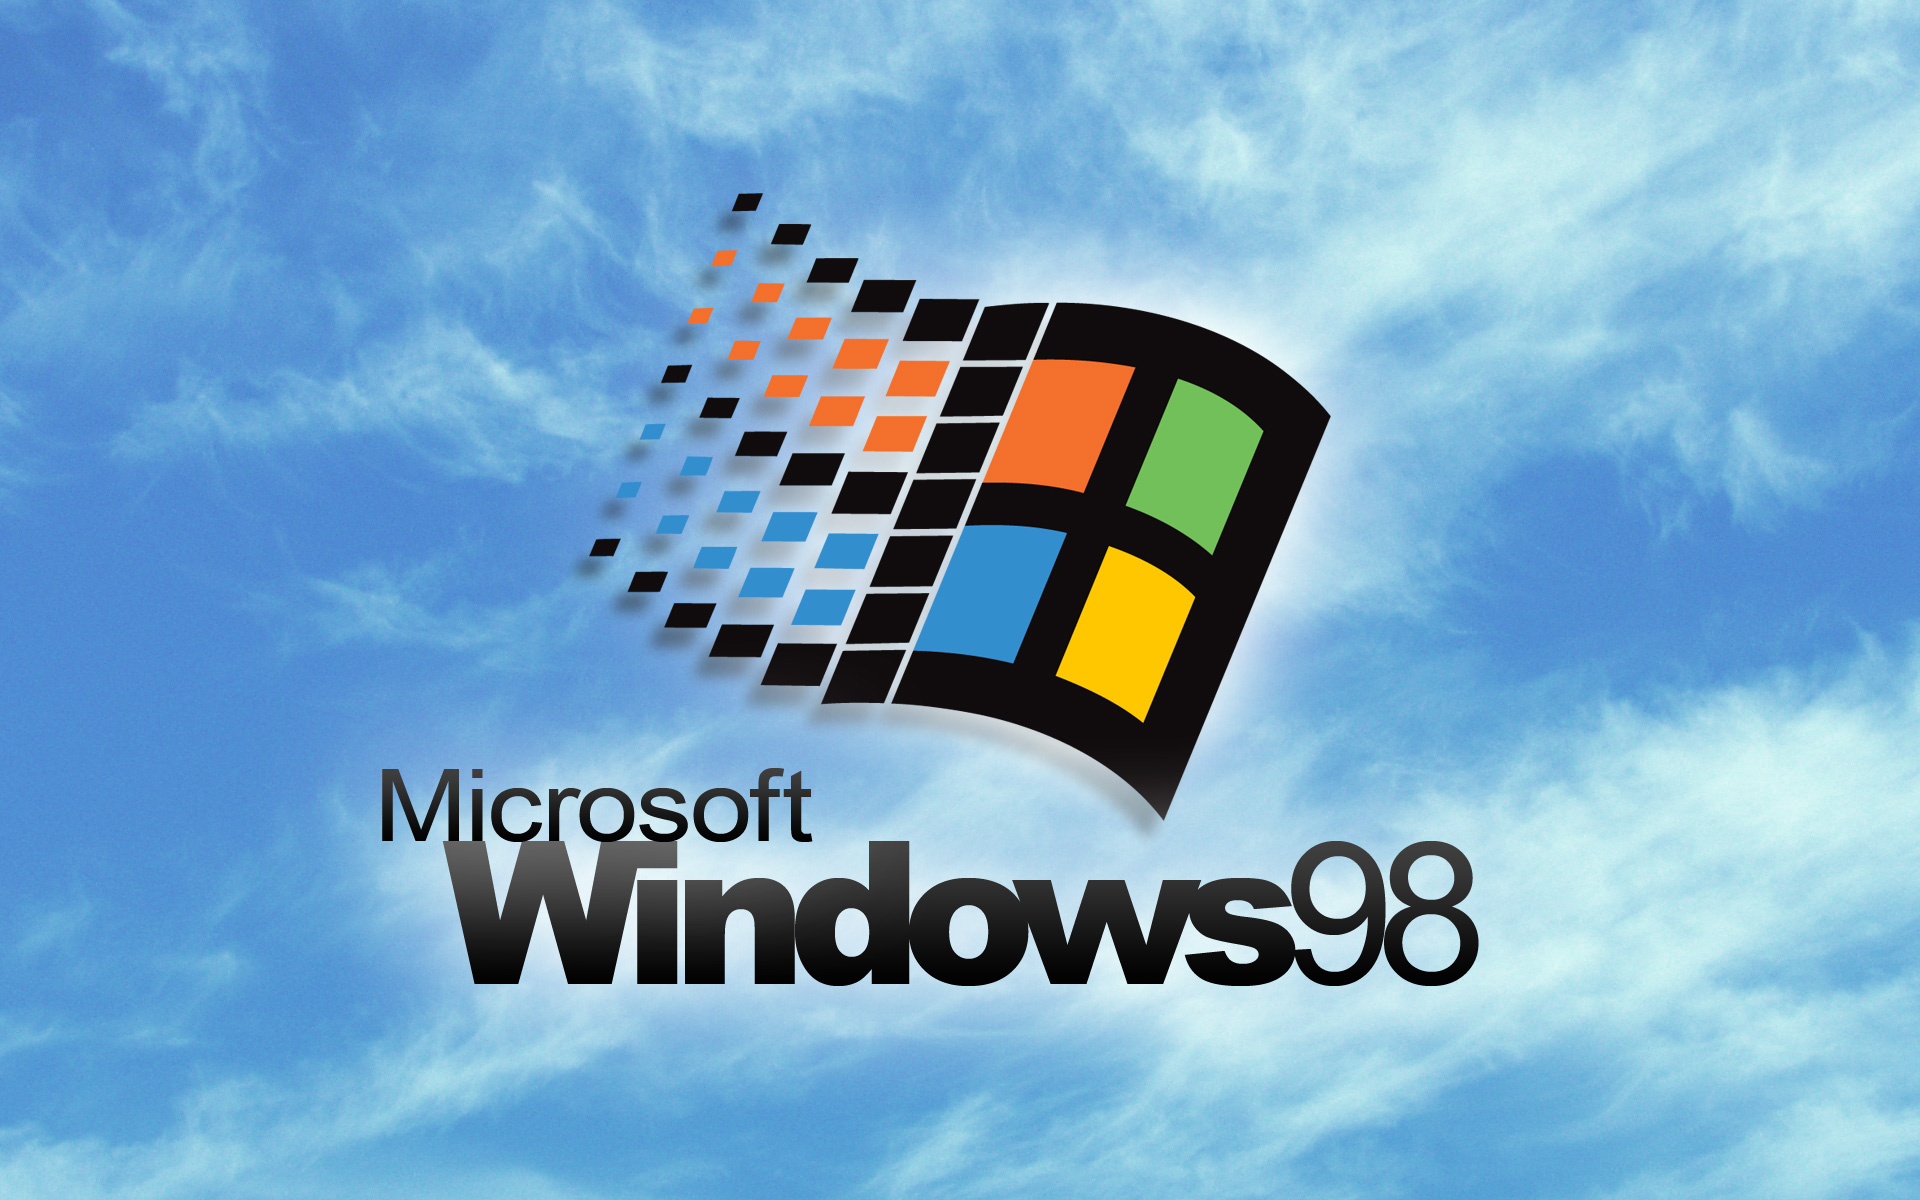 Windows Xp Boot Disk for Windows - downloadcnetcom